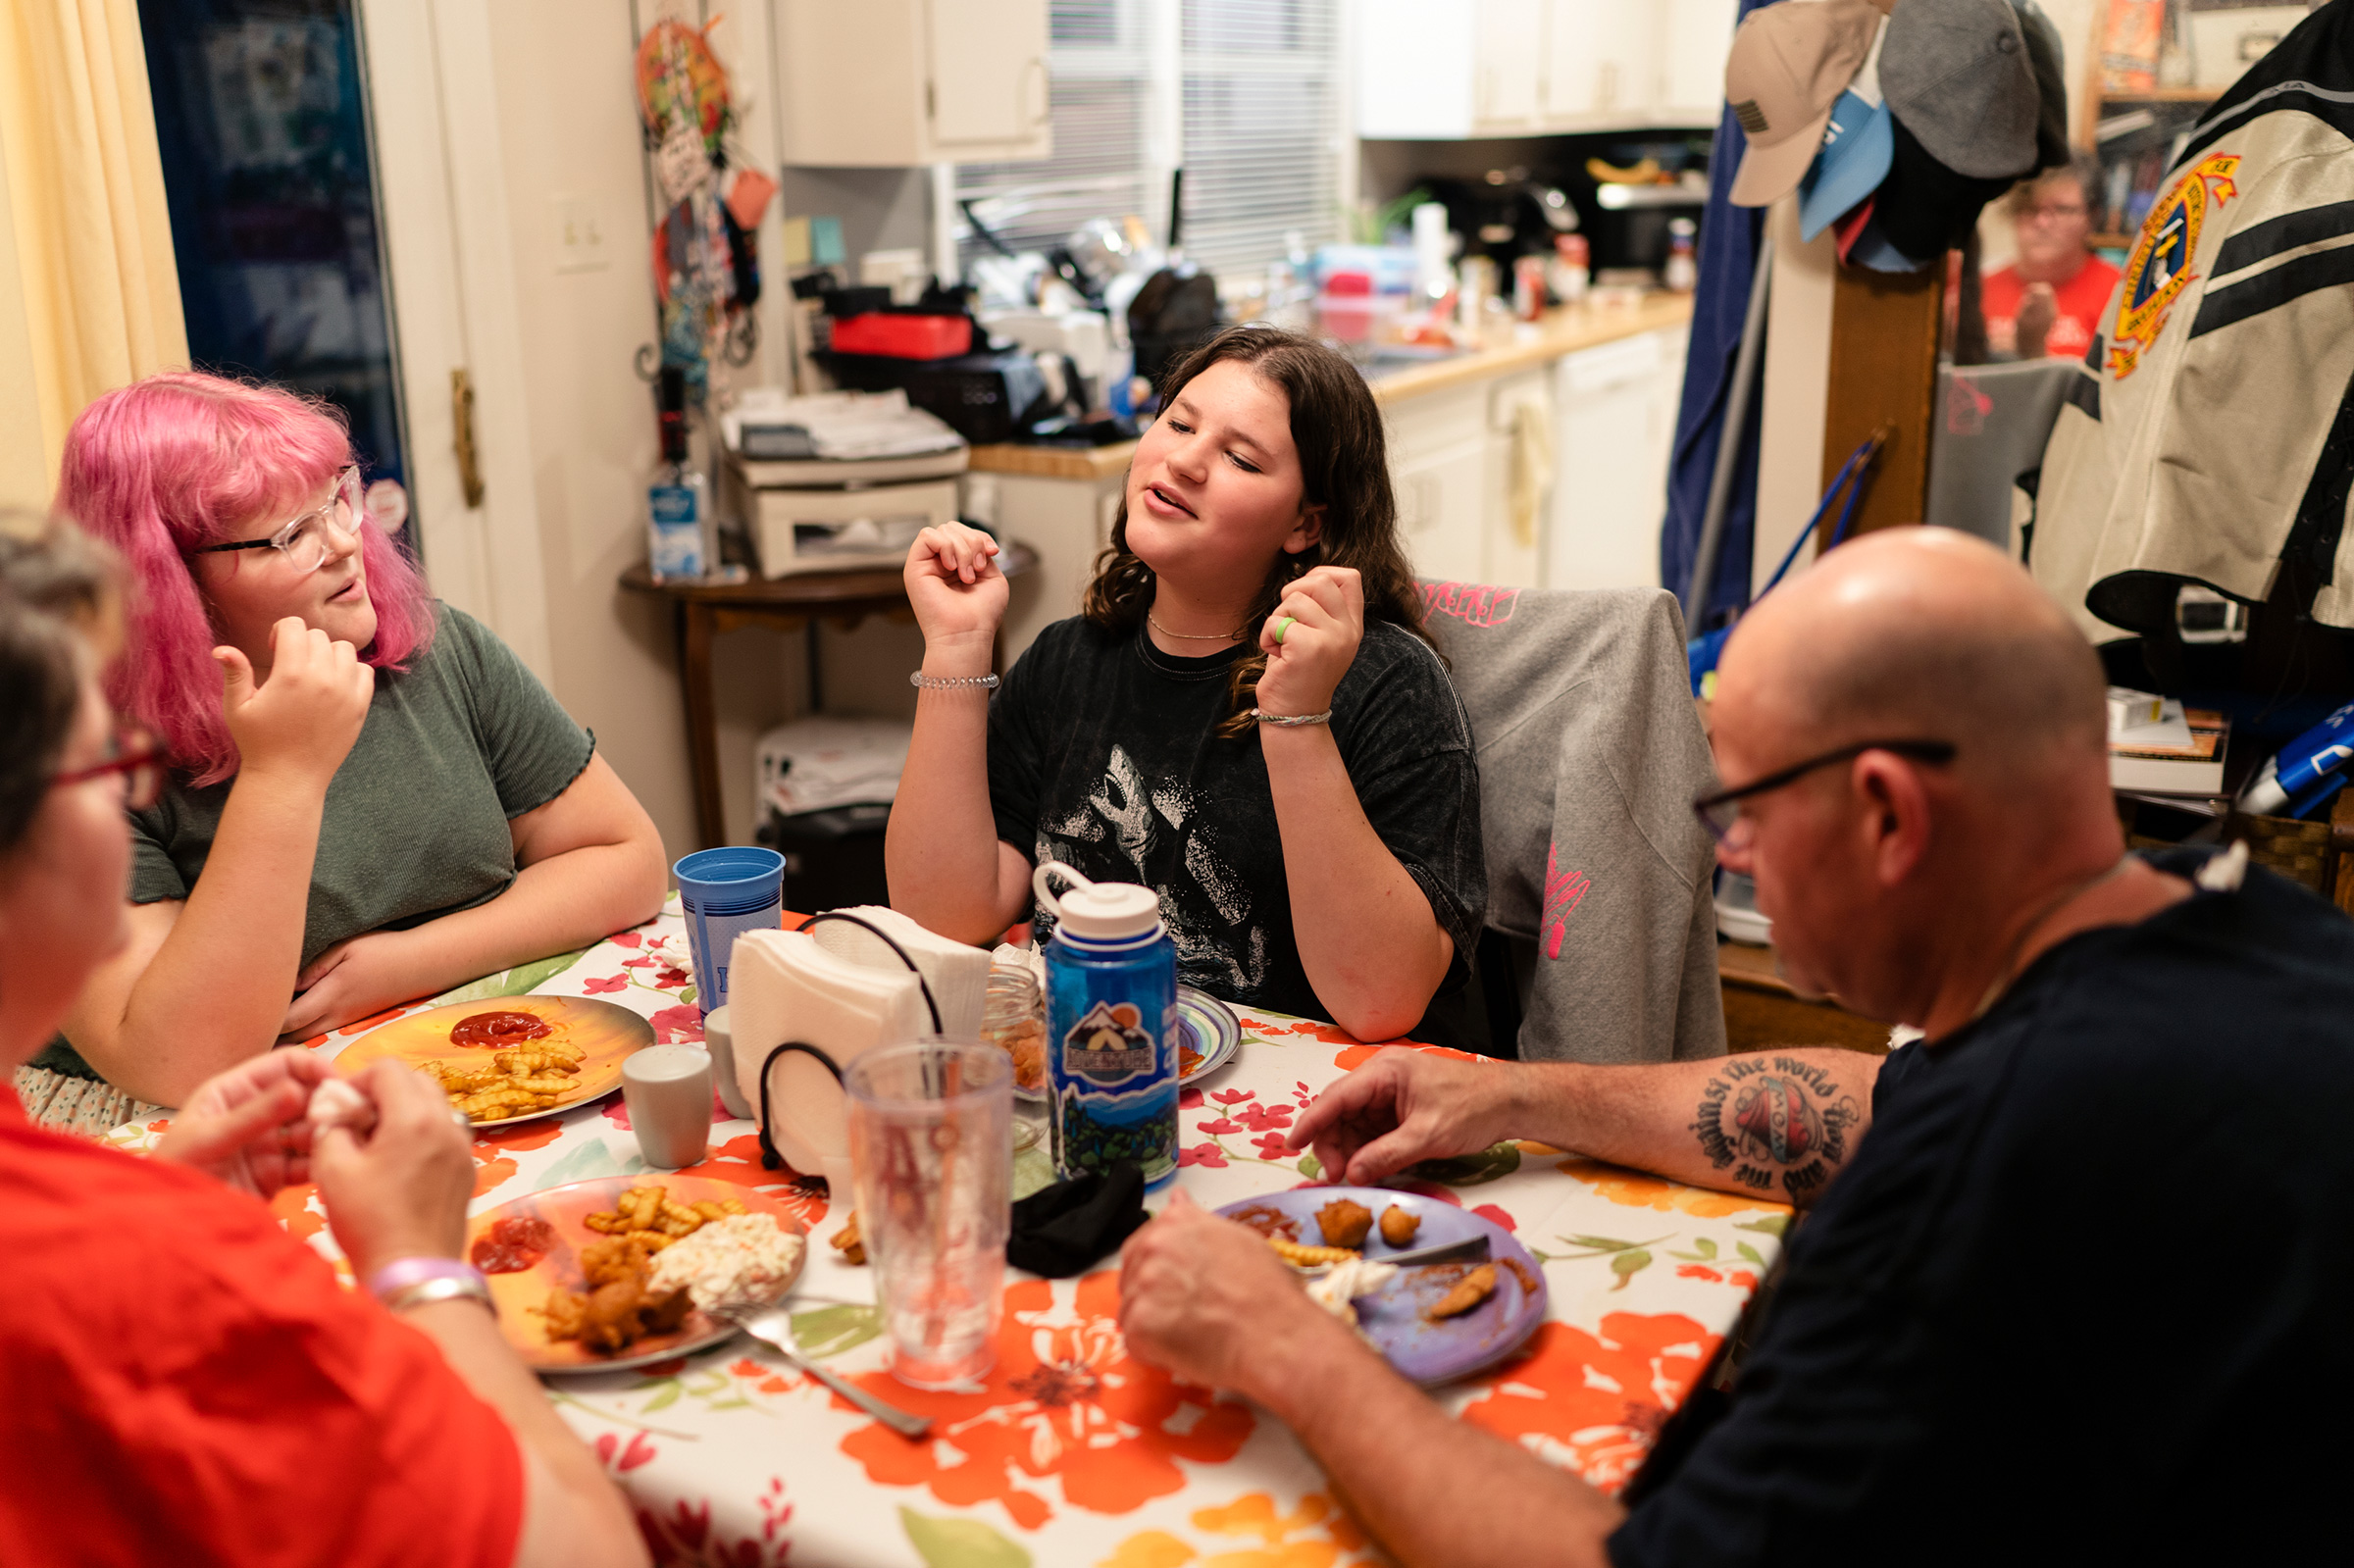 Maddie, 15, right center, eats dinner with her family in North Carolina. “My family is my whole life,” Maddie says. Whenever they have to make a decision, she says, they always consider how it will impact all four of them. “I love that for us,” she says. “All the times I’m with my family, whether we’re fighting or whether we’re laughing, it’s always good times.” (Annie Flanagan)